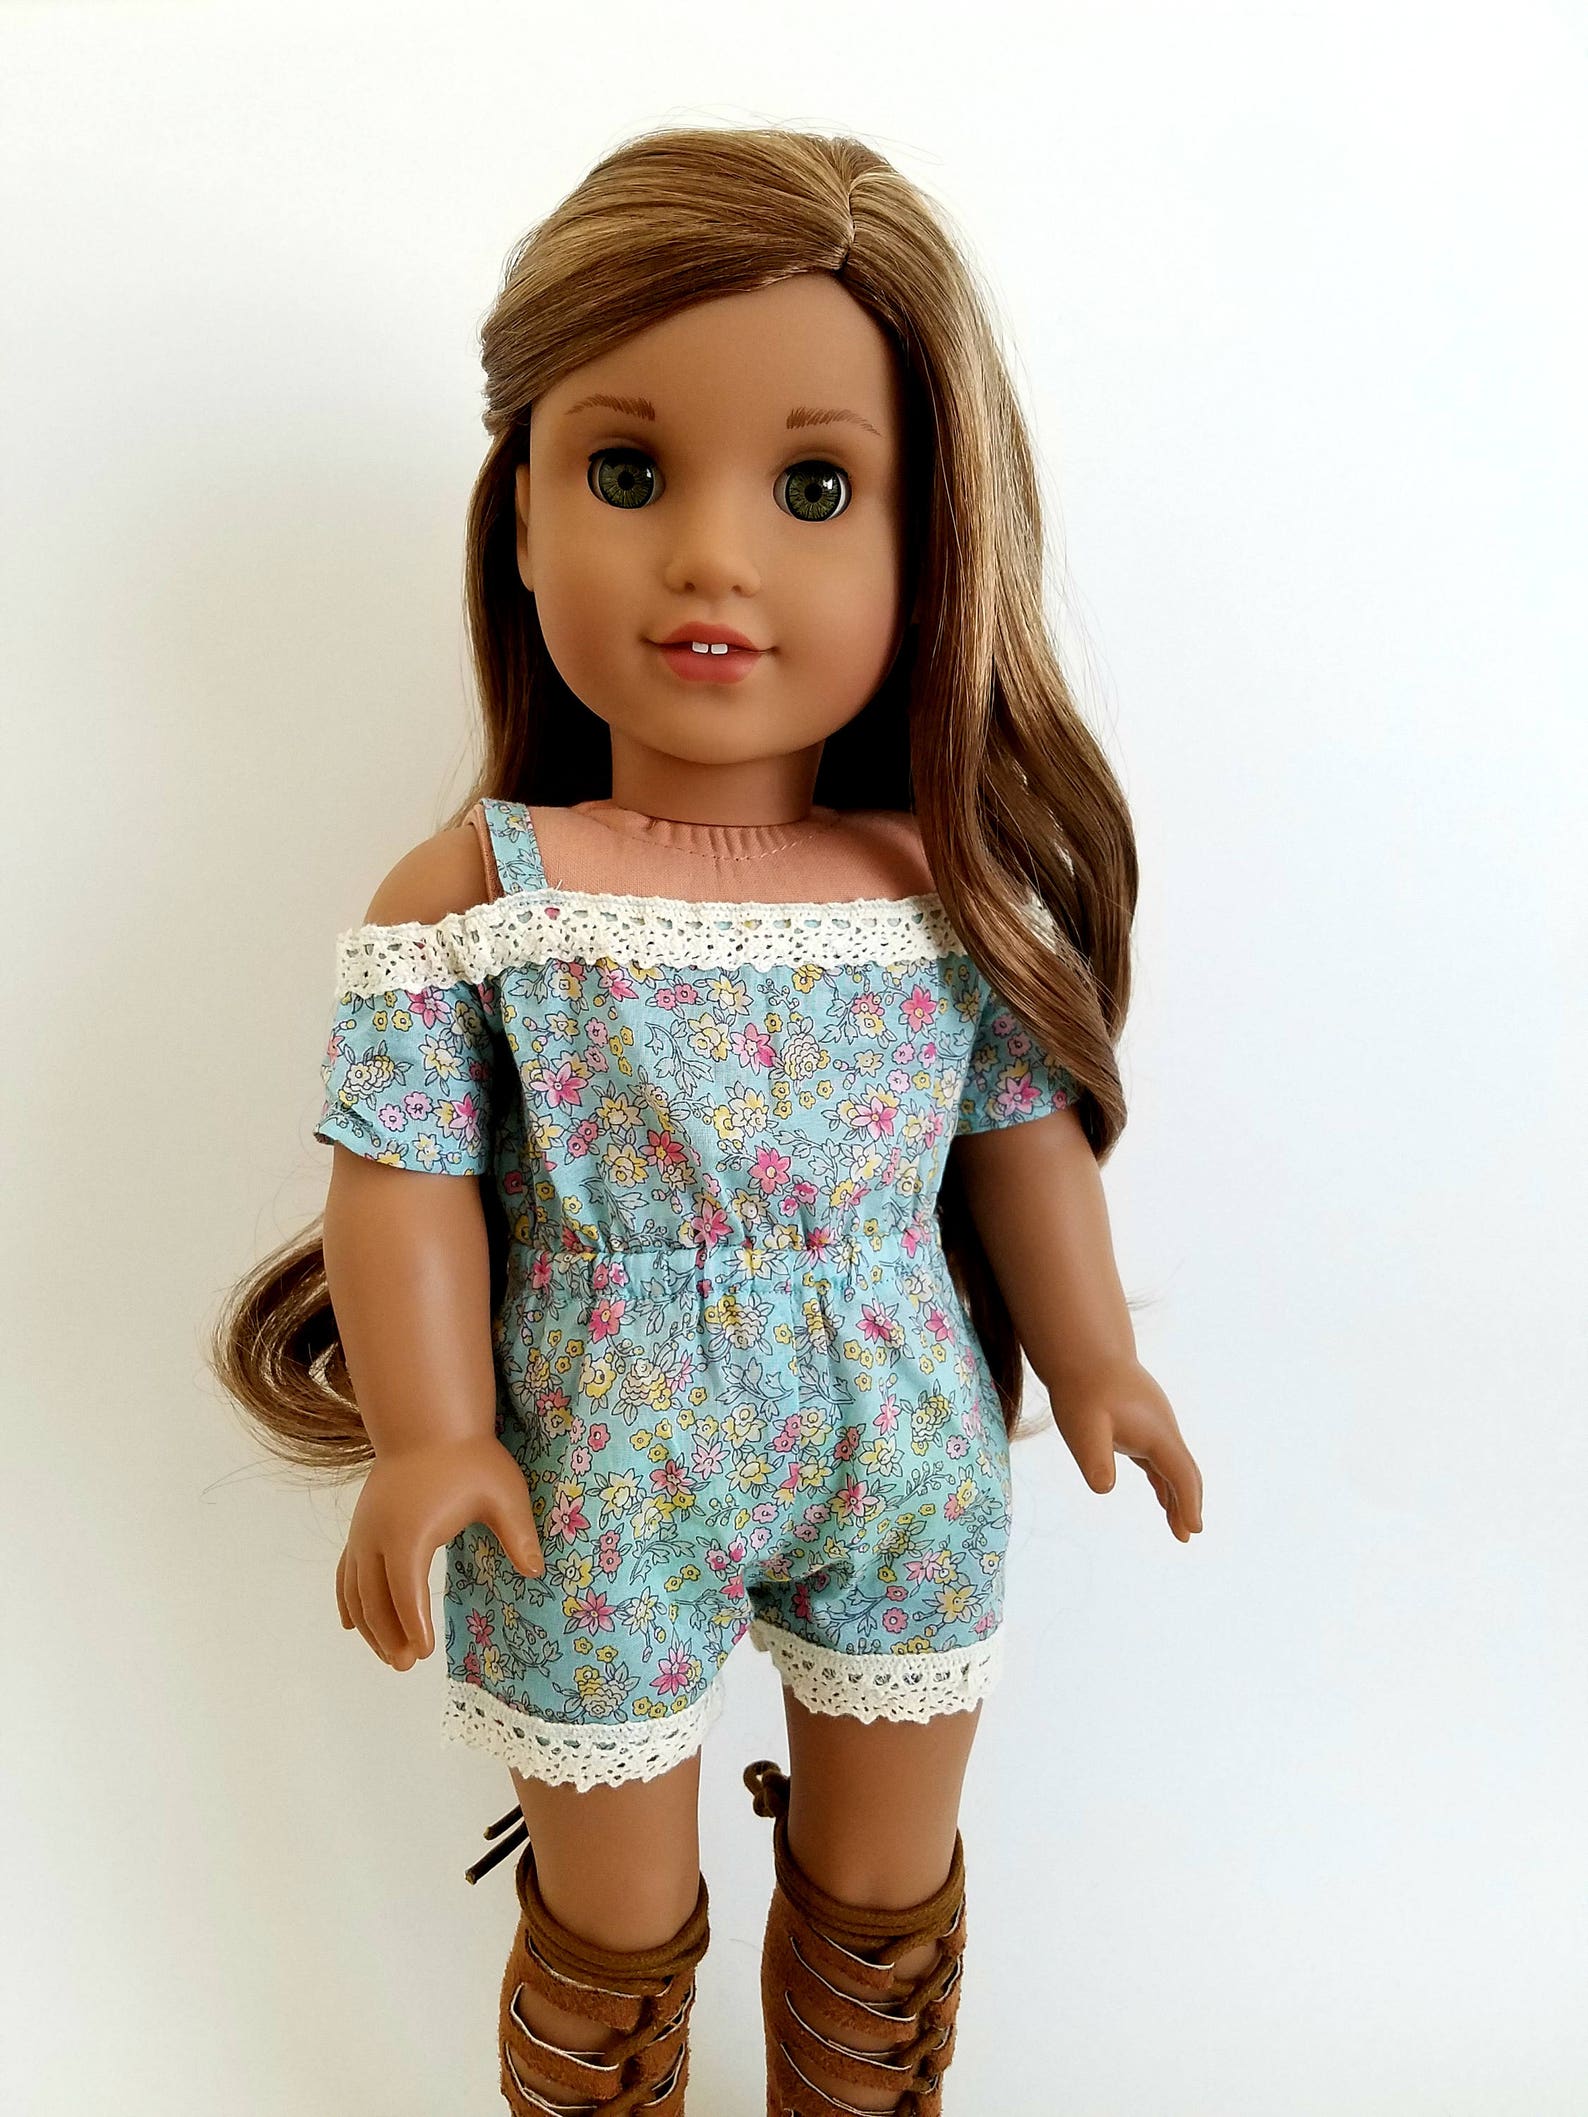 Off Shoulder Romper with Lace Trim for American Girl Dolls | Etsy